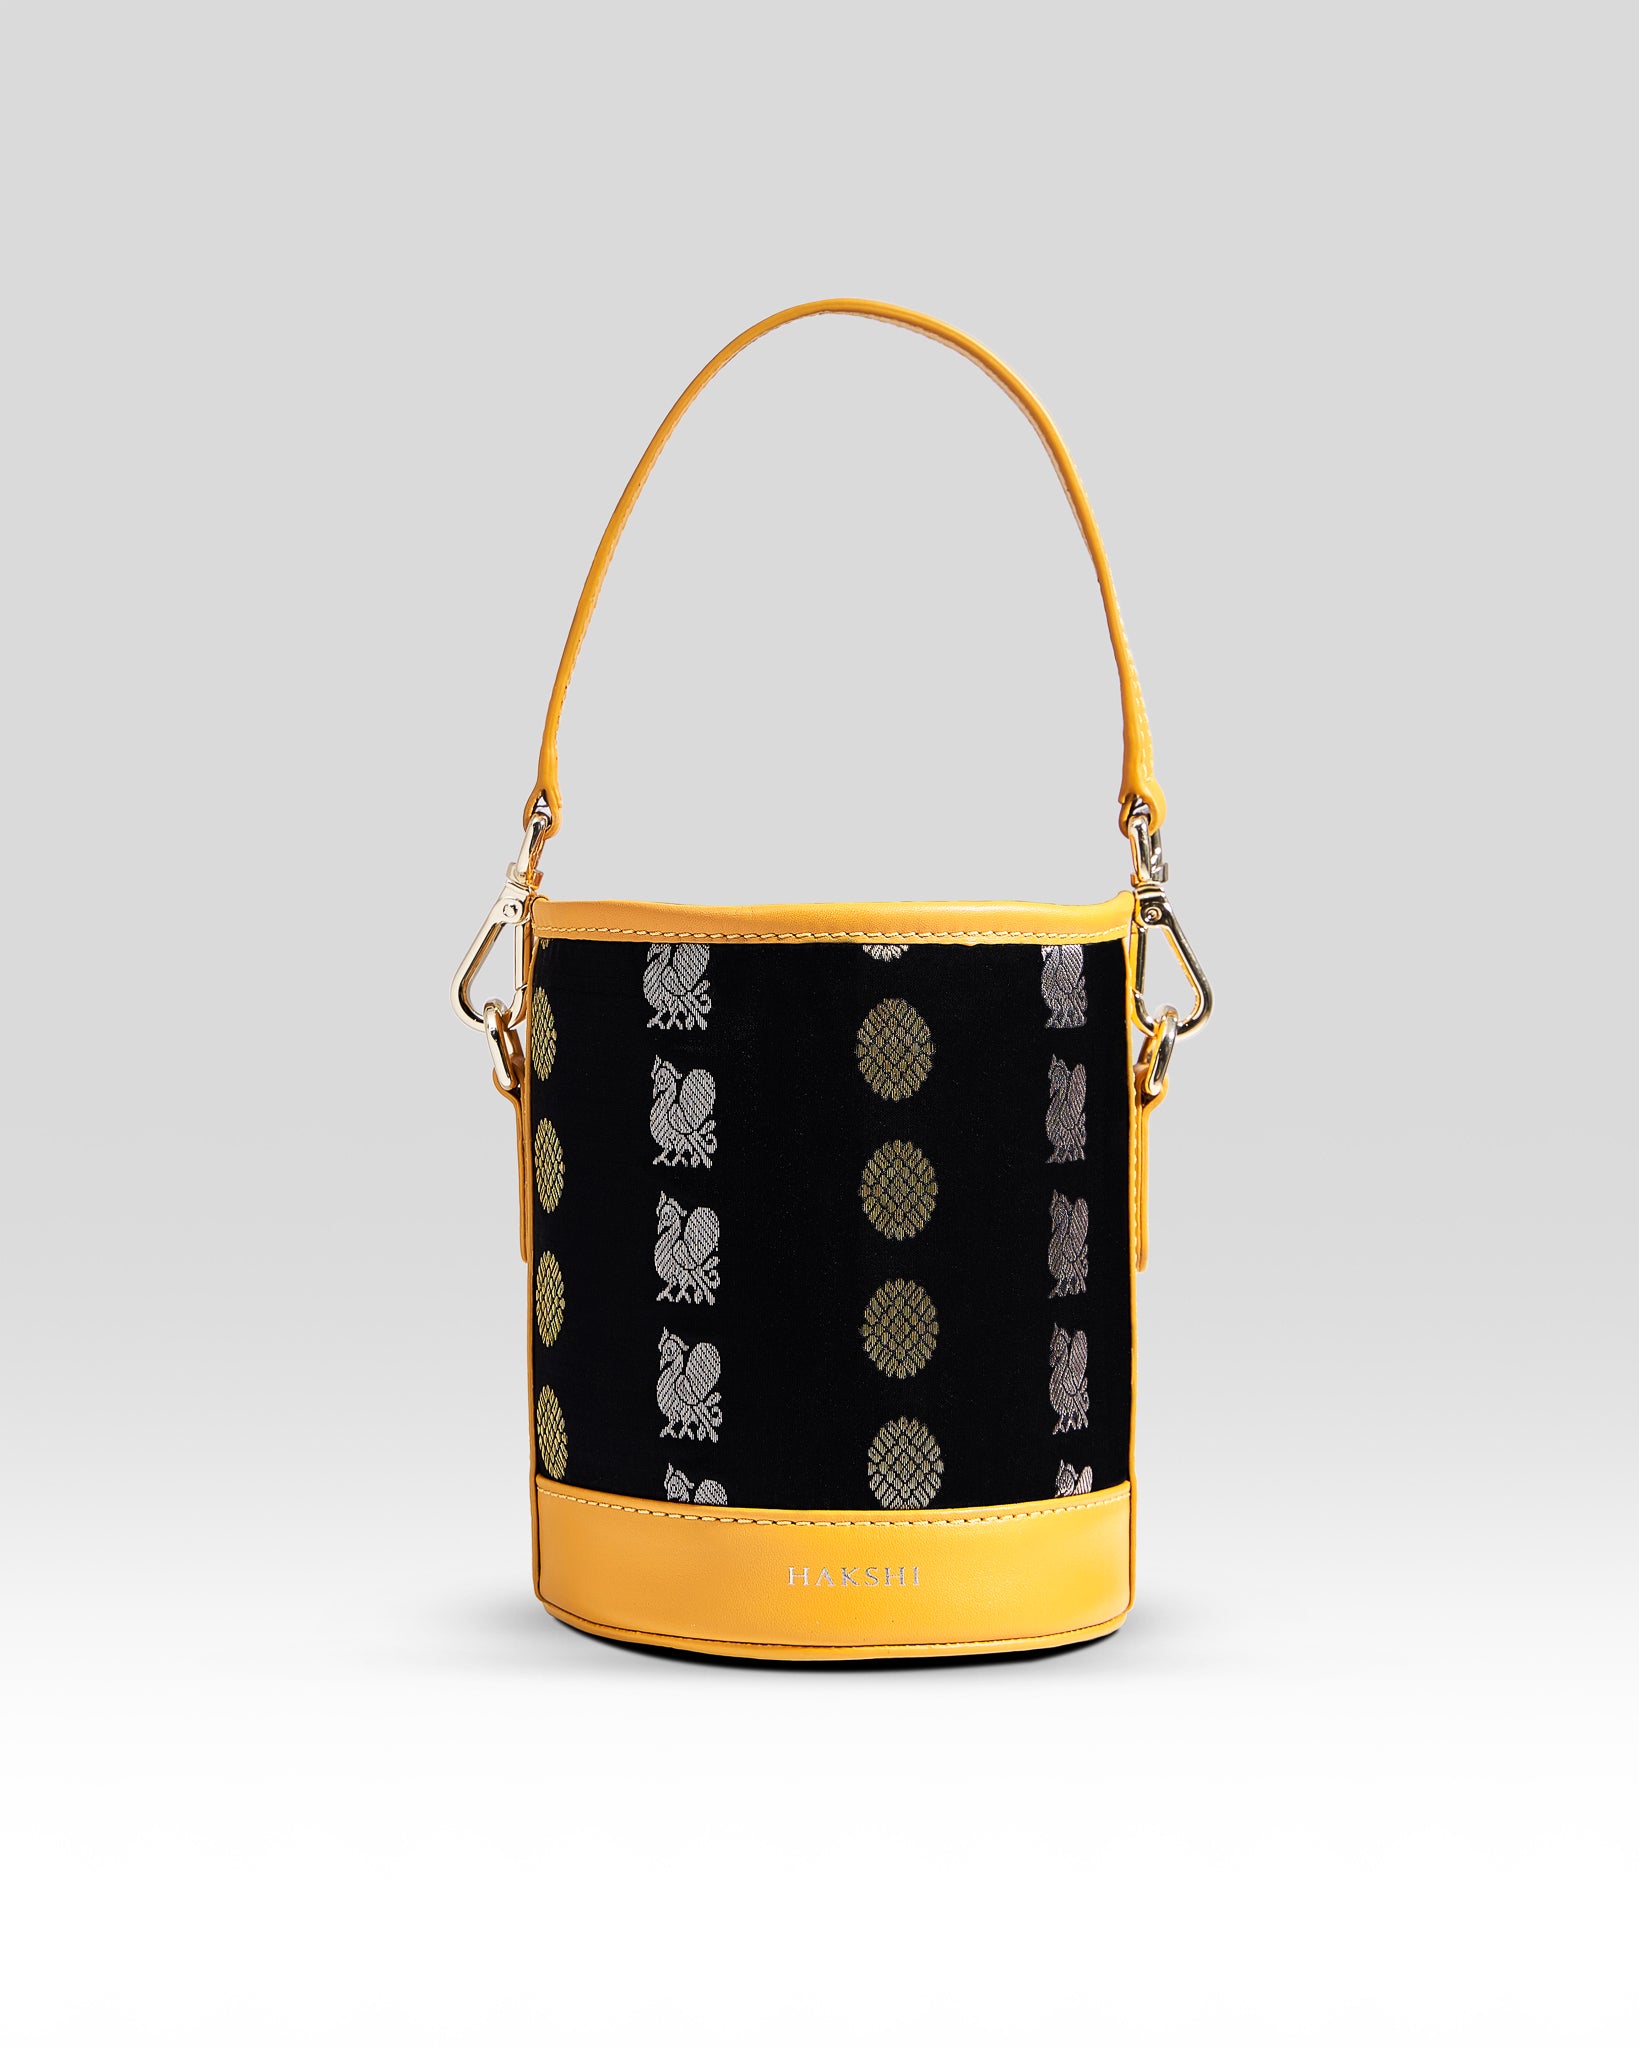 Stylish women's handbag featuring sleek design and versatile functionality, ideal for any occasion